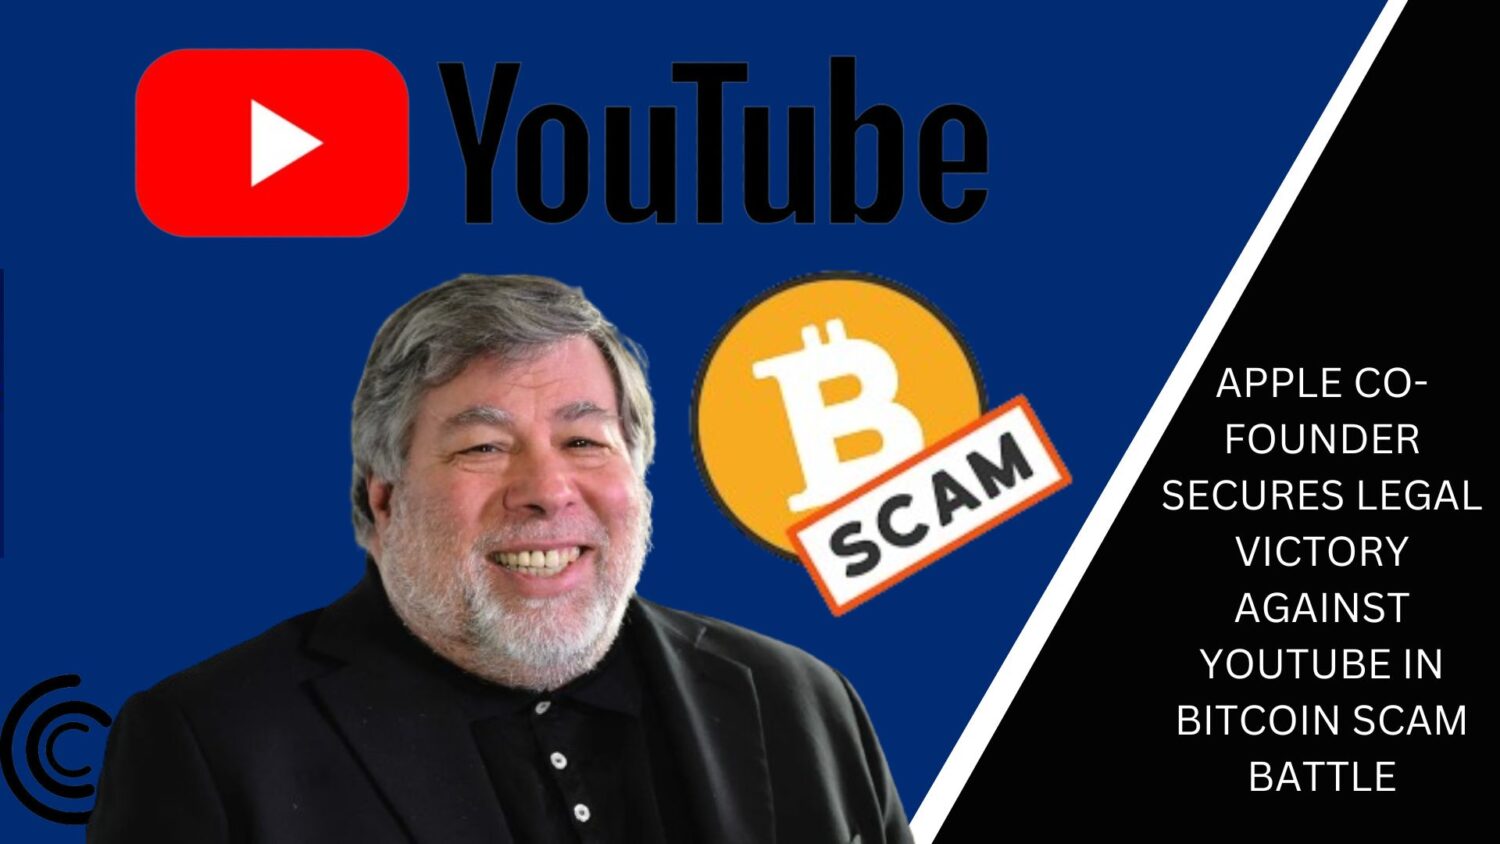 Apple Co-Founder Secures Legal Victory Against Youtube In Bitcoin Scam Battle